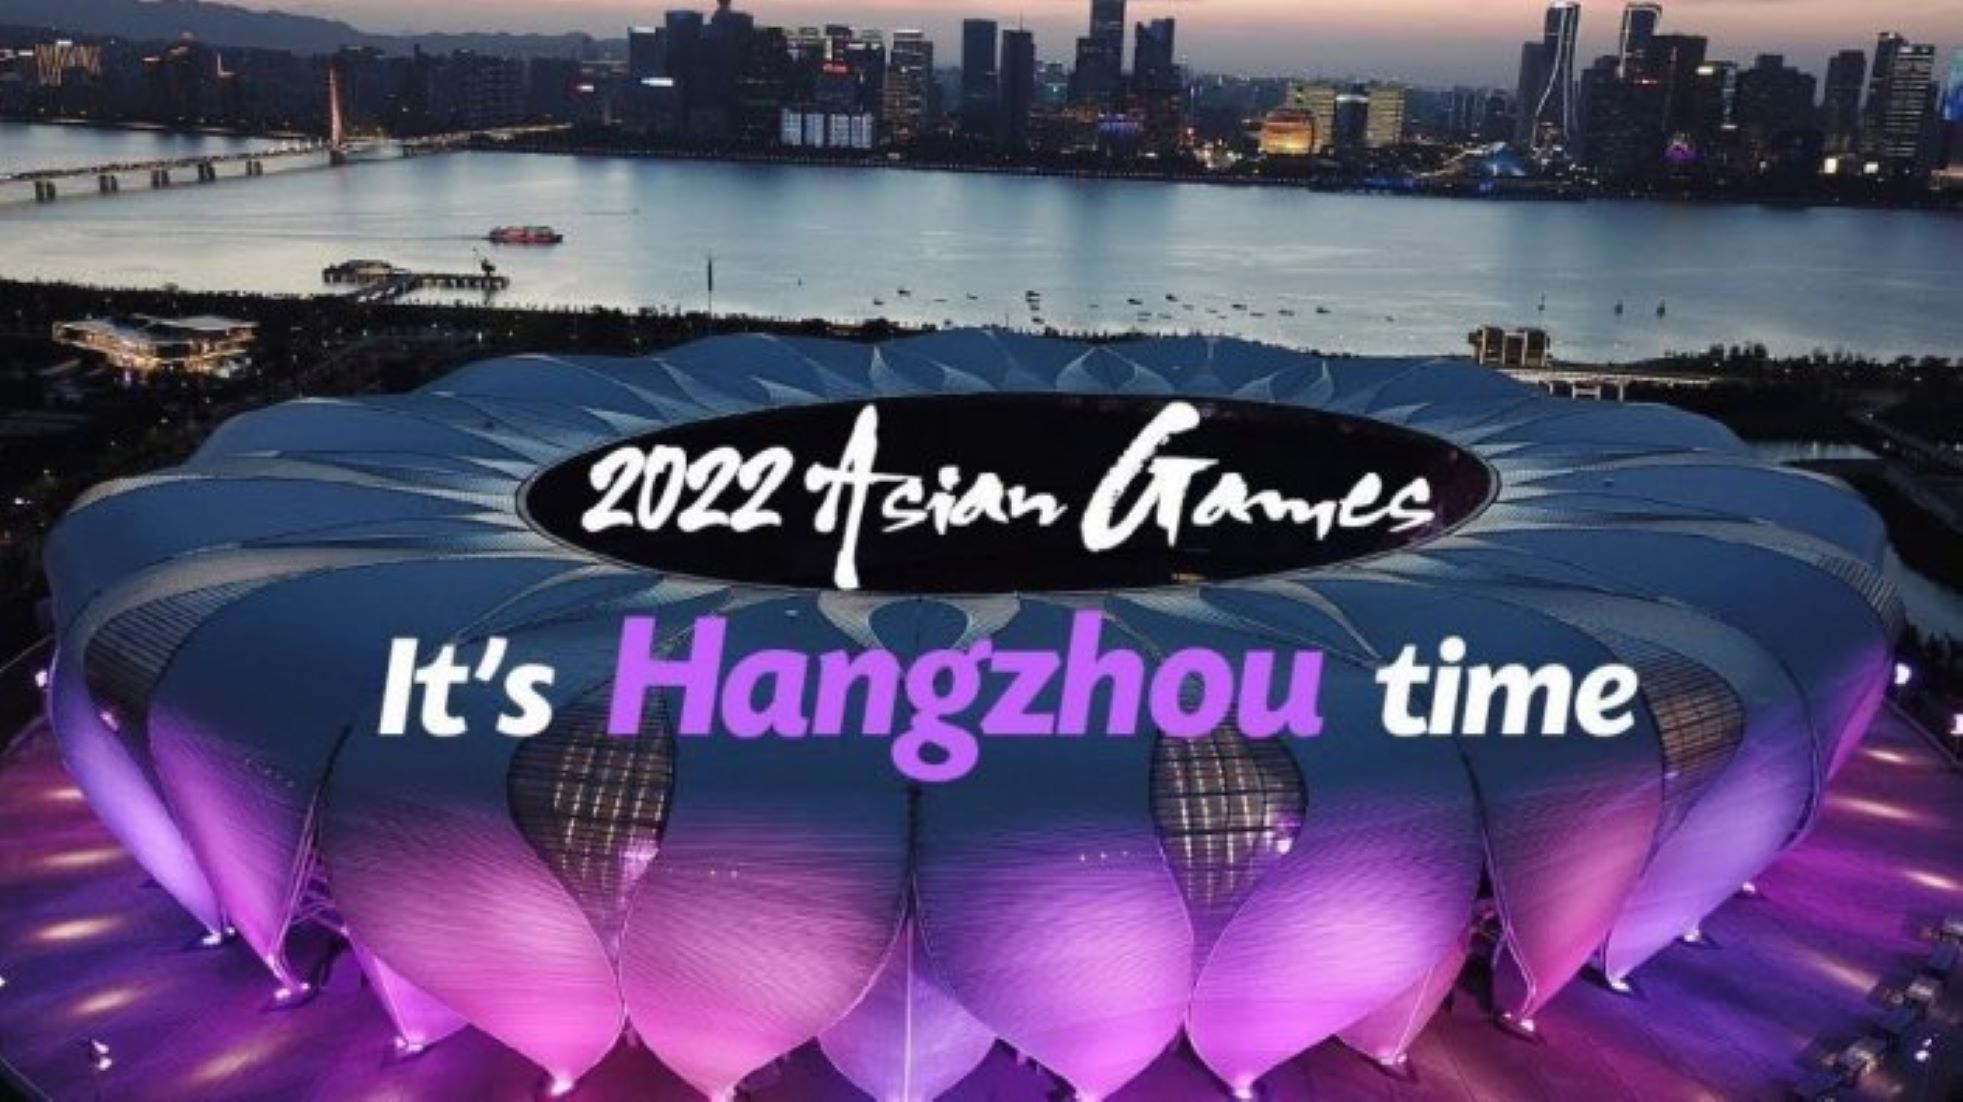 Mongolia To Send Largest Ever Delegation To Hangzhou Asian Games